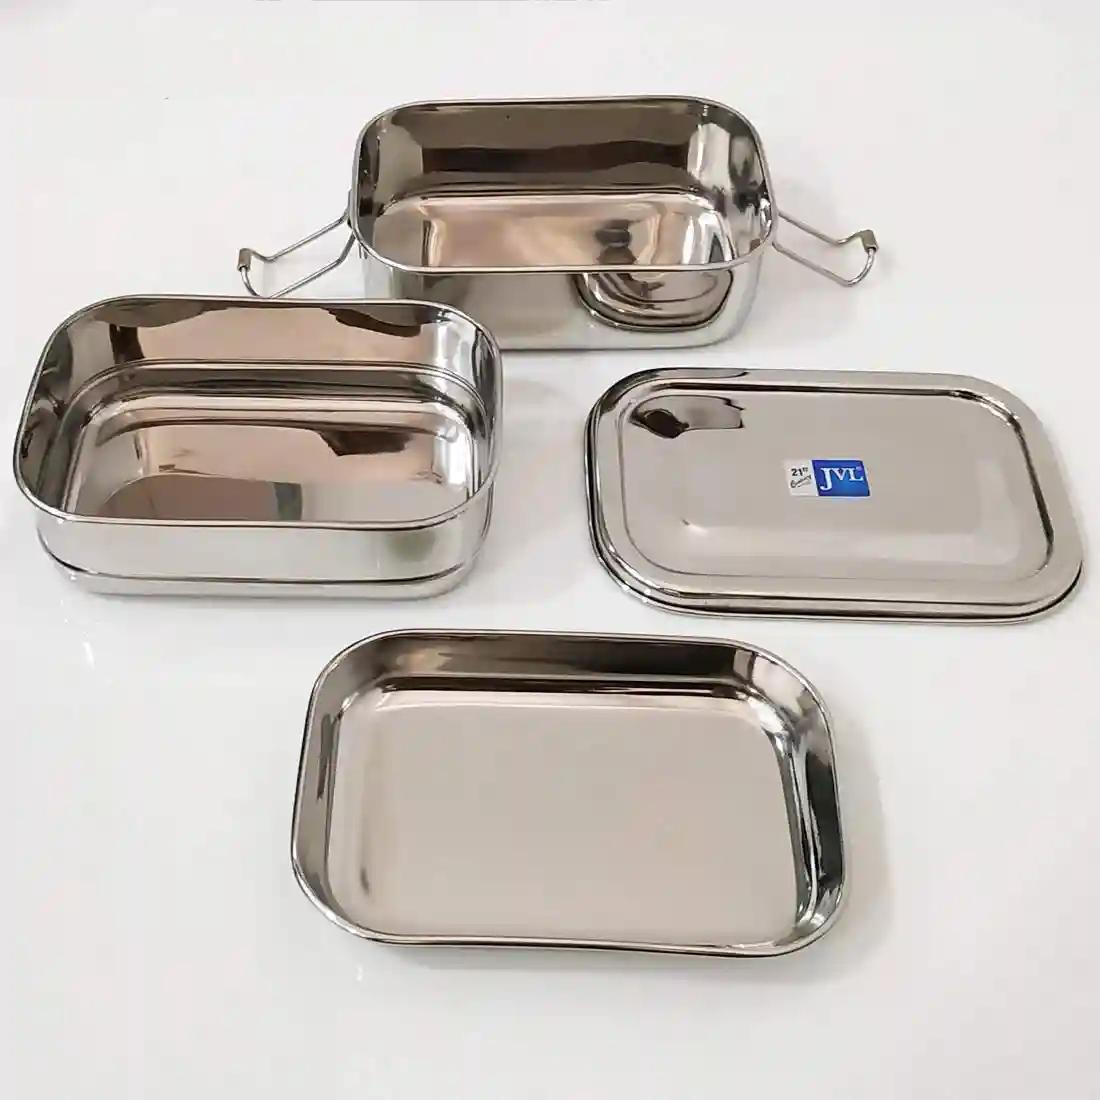 Jvl Stainless Steel Rectangular Shape Double Layer Lunch Box With Inner Plate & Small Square Shape Lunch Box With Mini Container Not Leak Proof - Pack Of 2